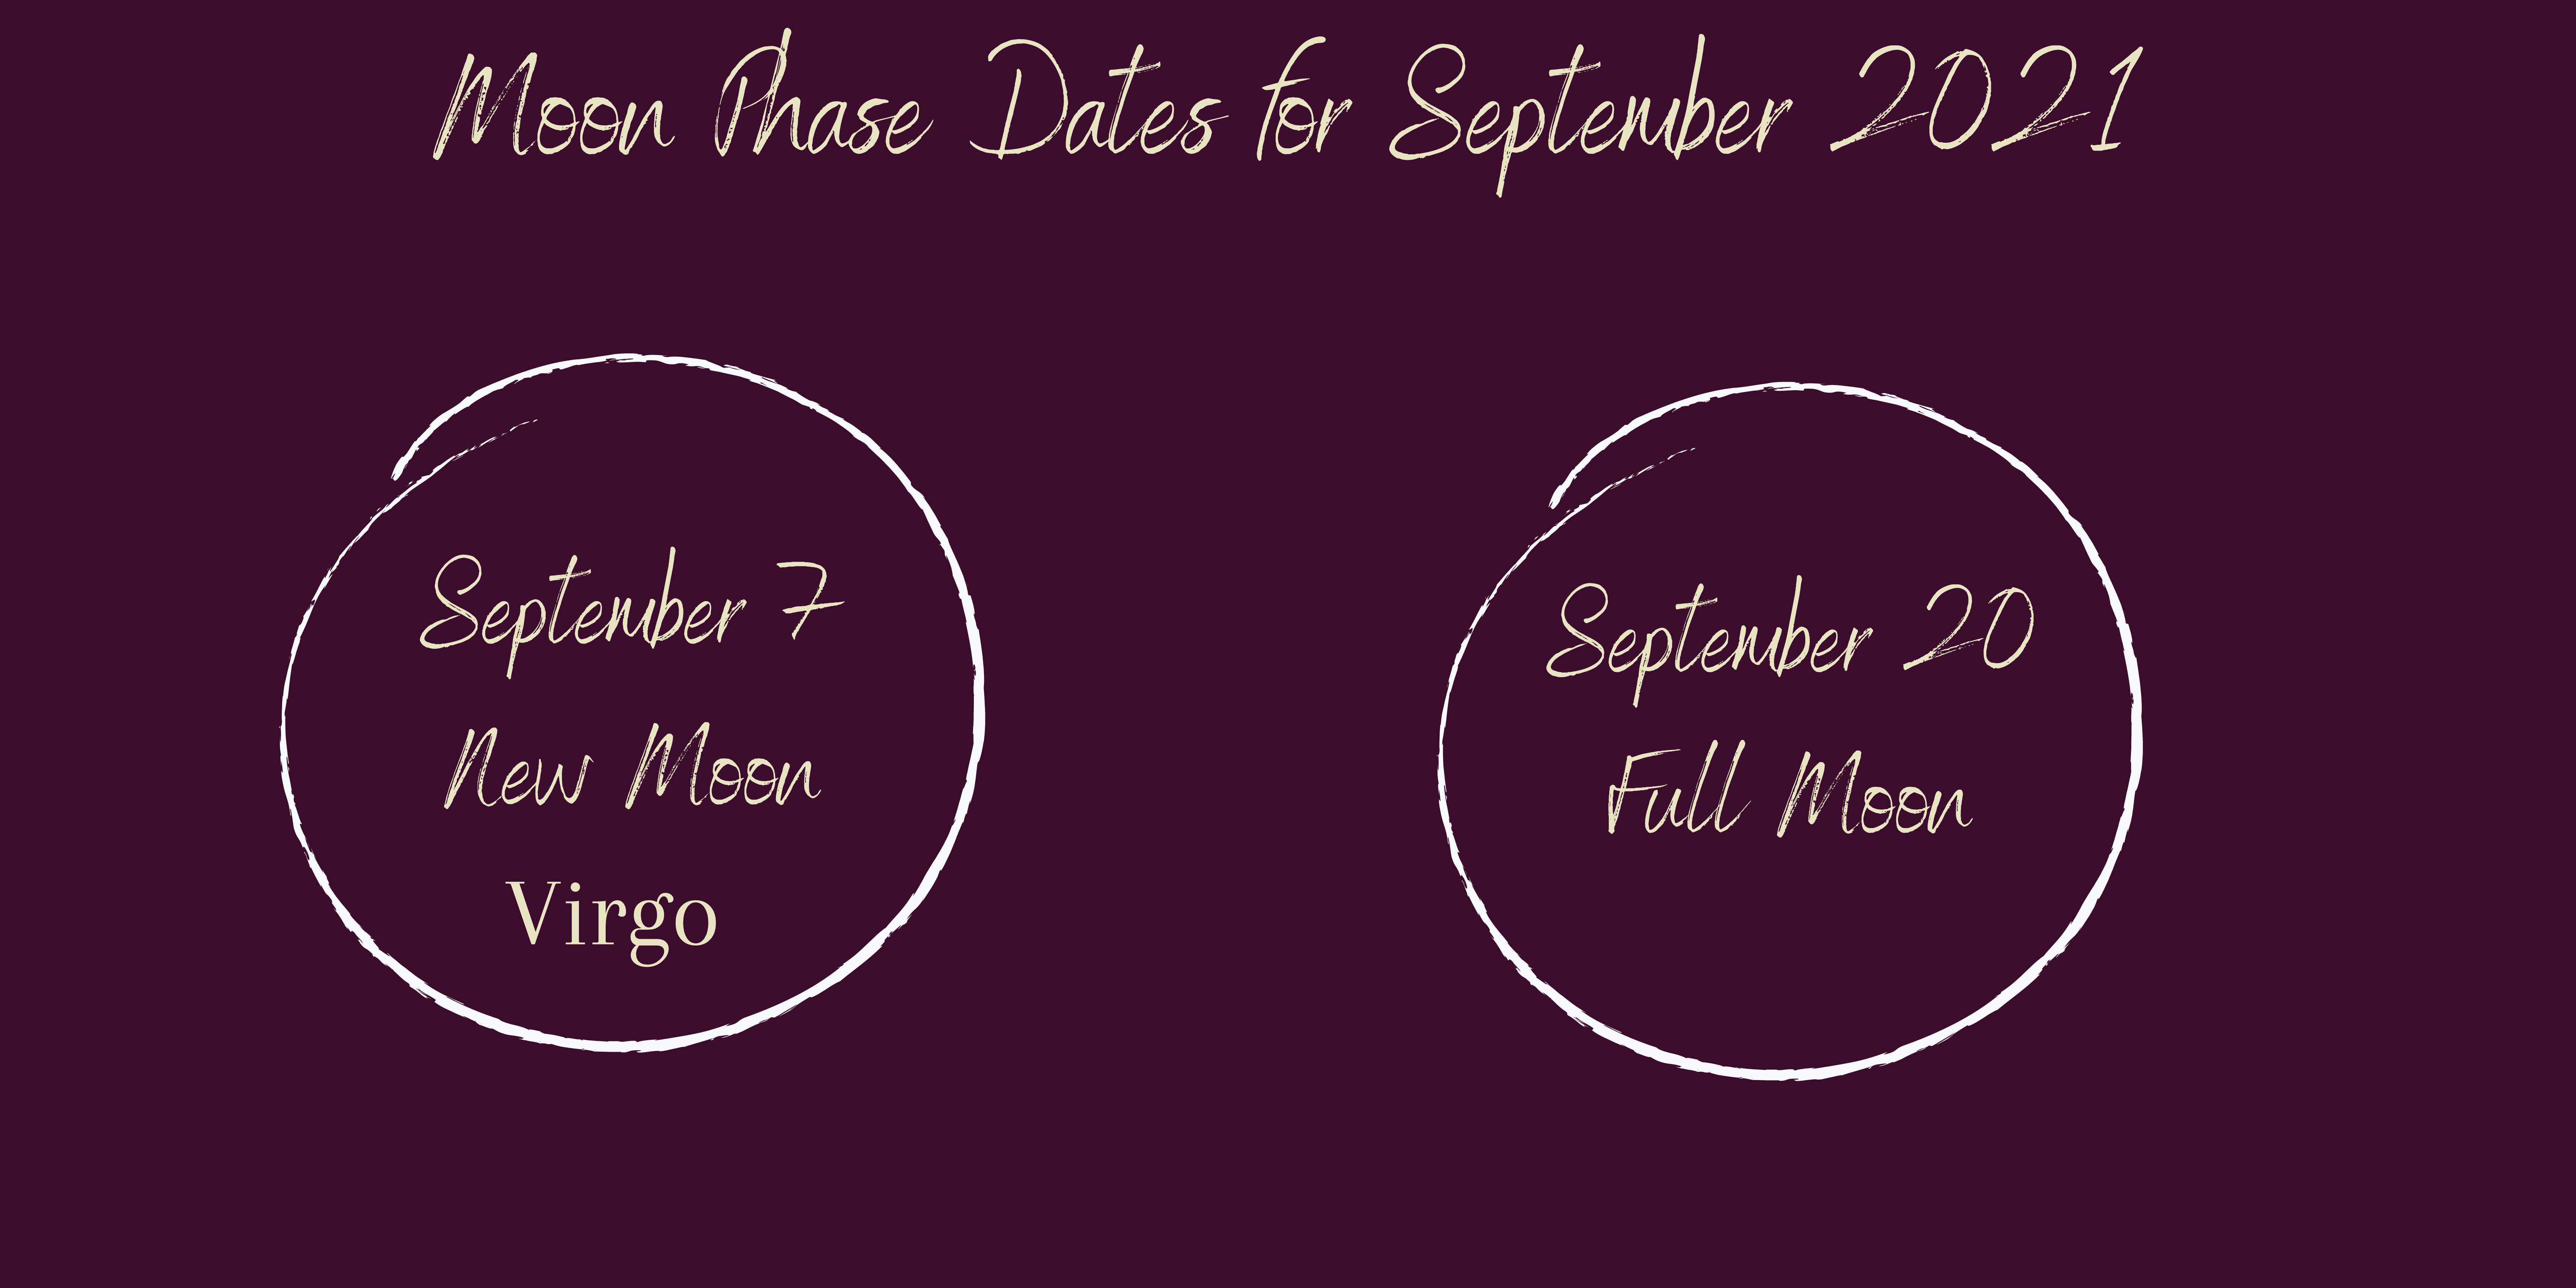 Full moon Sept 20 and New Moon Sept 7. These are the "important" moon phases, ideal for those wishing to learn how to use the moon for magic or seeking to improve their interaction with lunar energies.